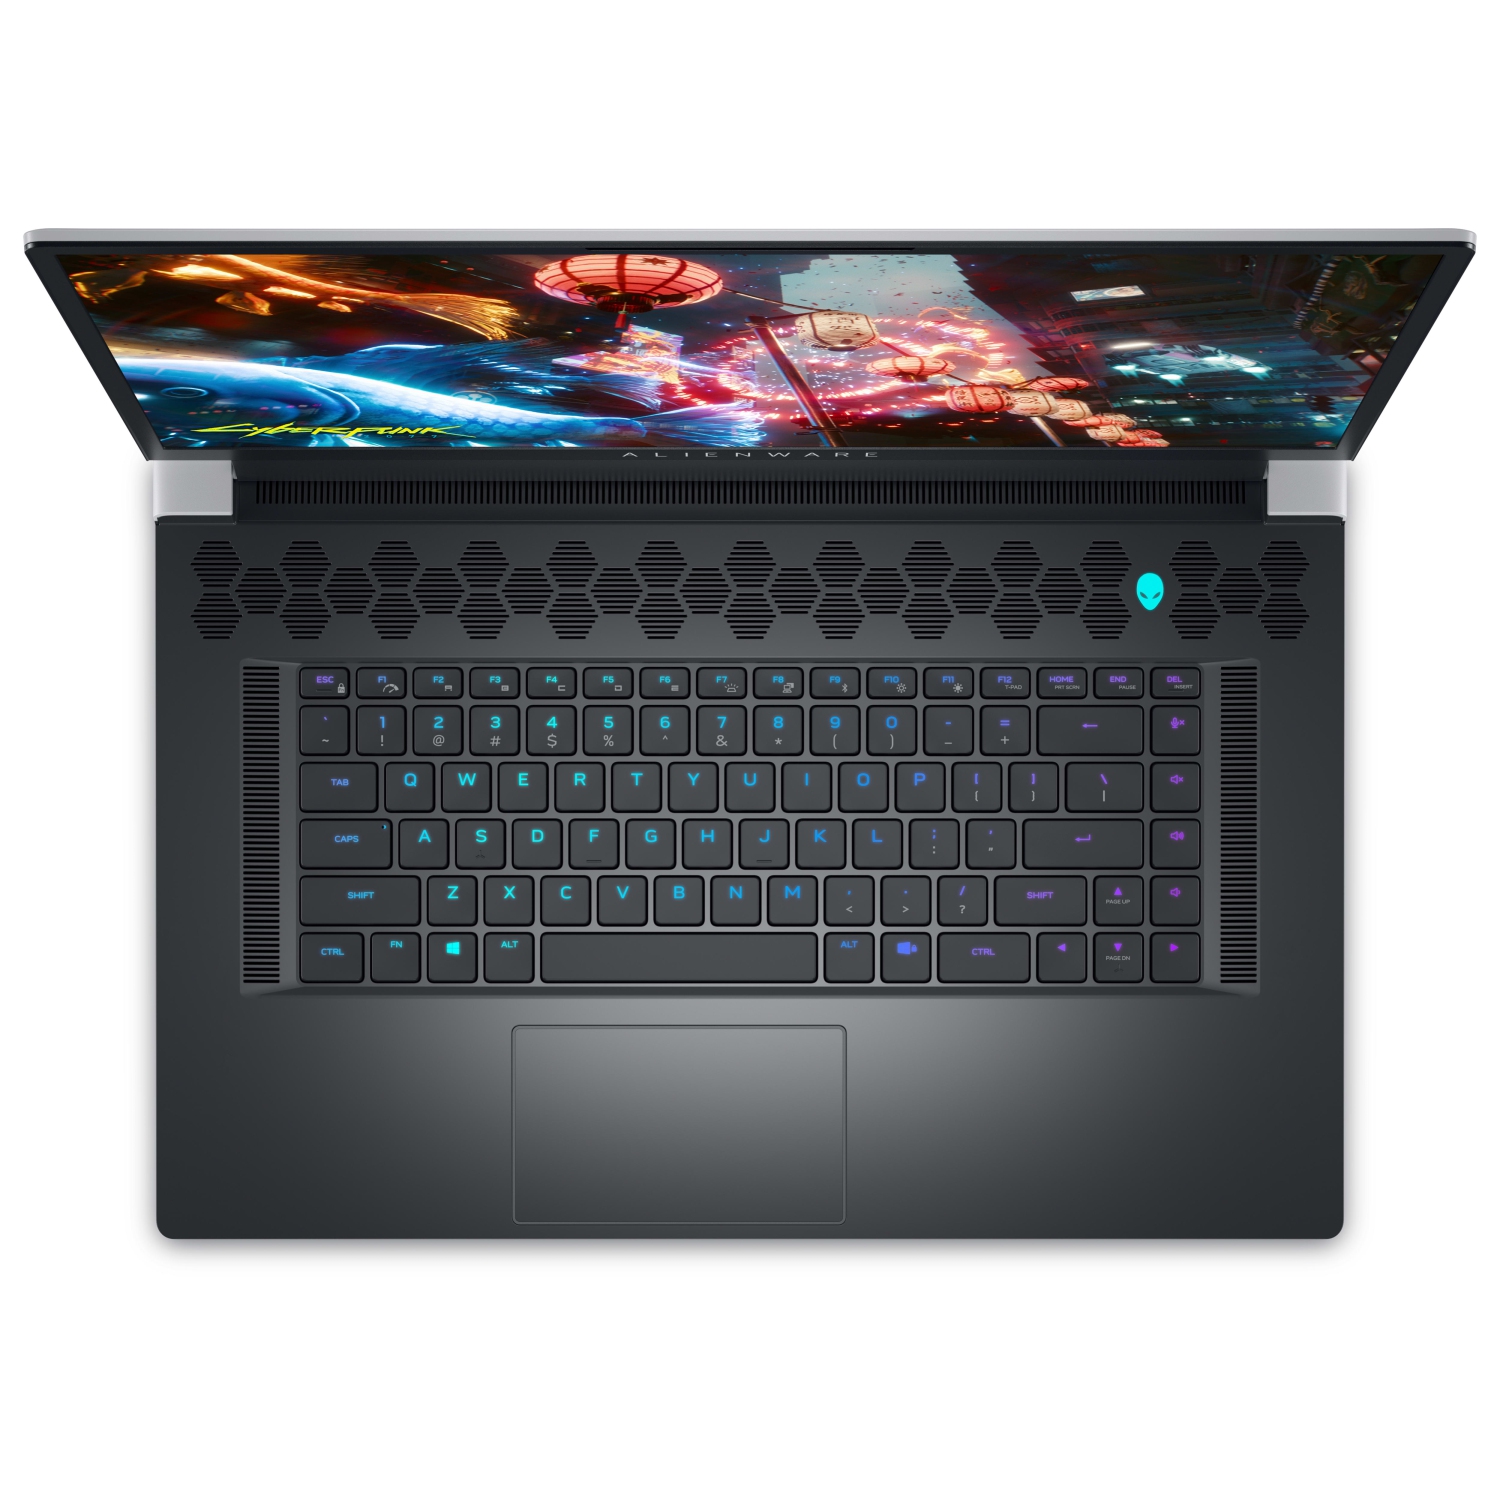 Refurbished (Excellent) – Dell Alienware X17 R2 Gaming Laptop (2022) | 17.3" FHD | Core i9 - 2TB SSD - 16GB RAM - 3080 Ti | 14 Cores @ 5 GHz - 12th Gen CPU - 16GB GDDR6X